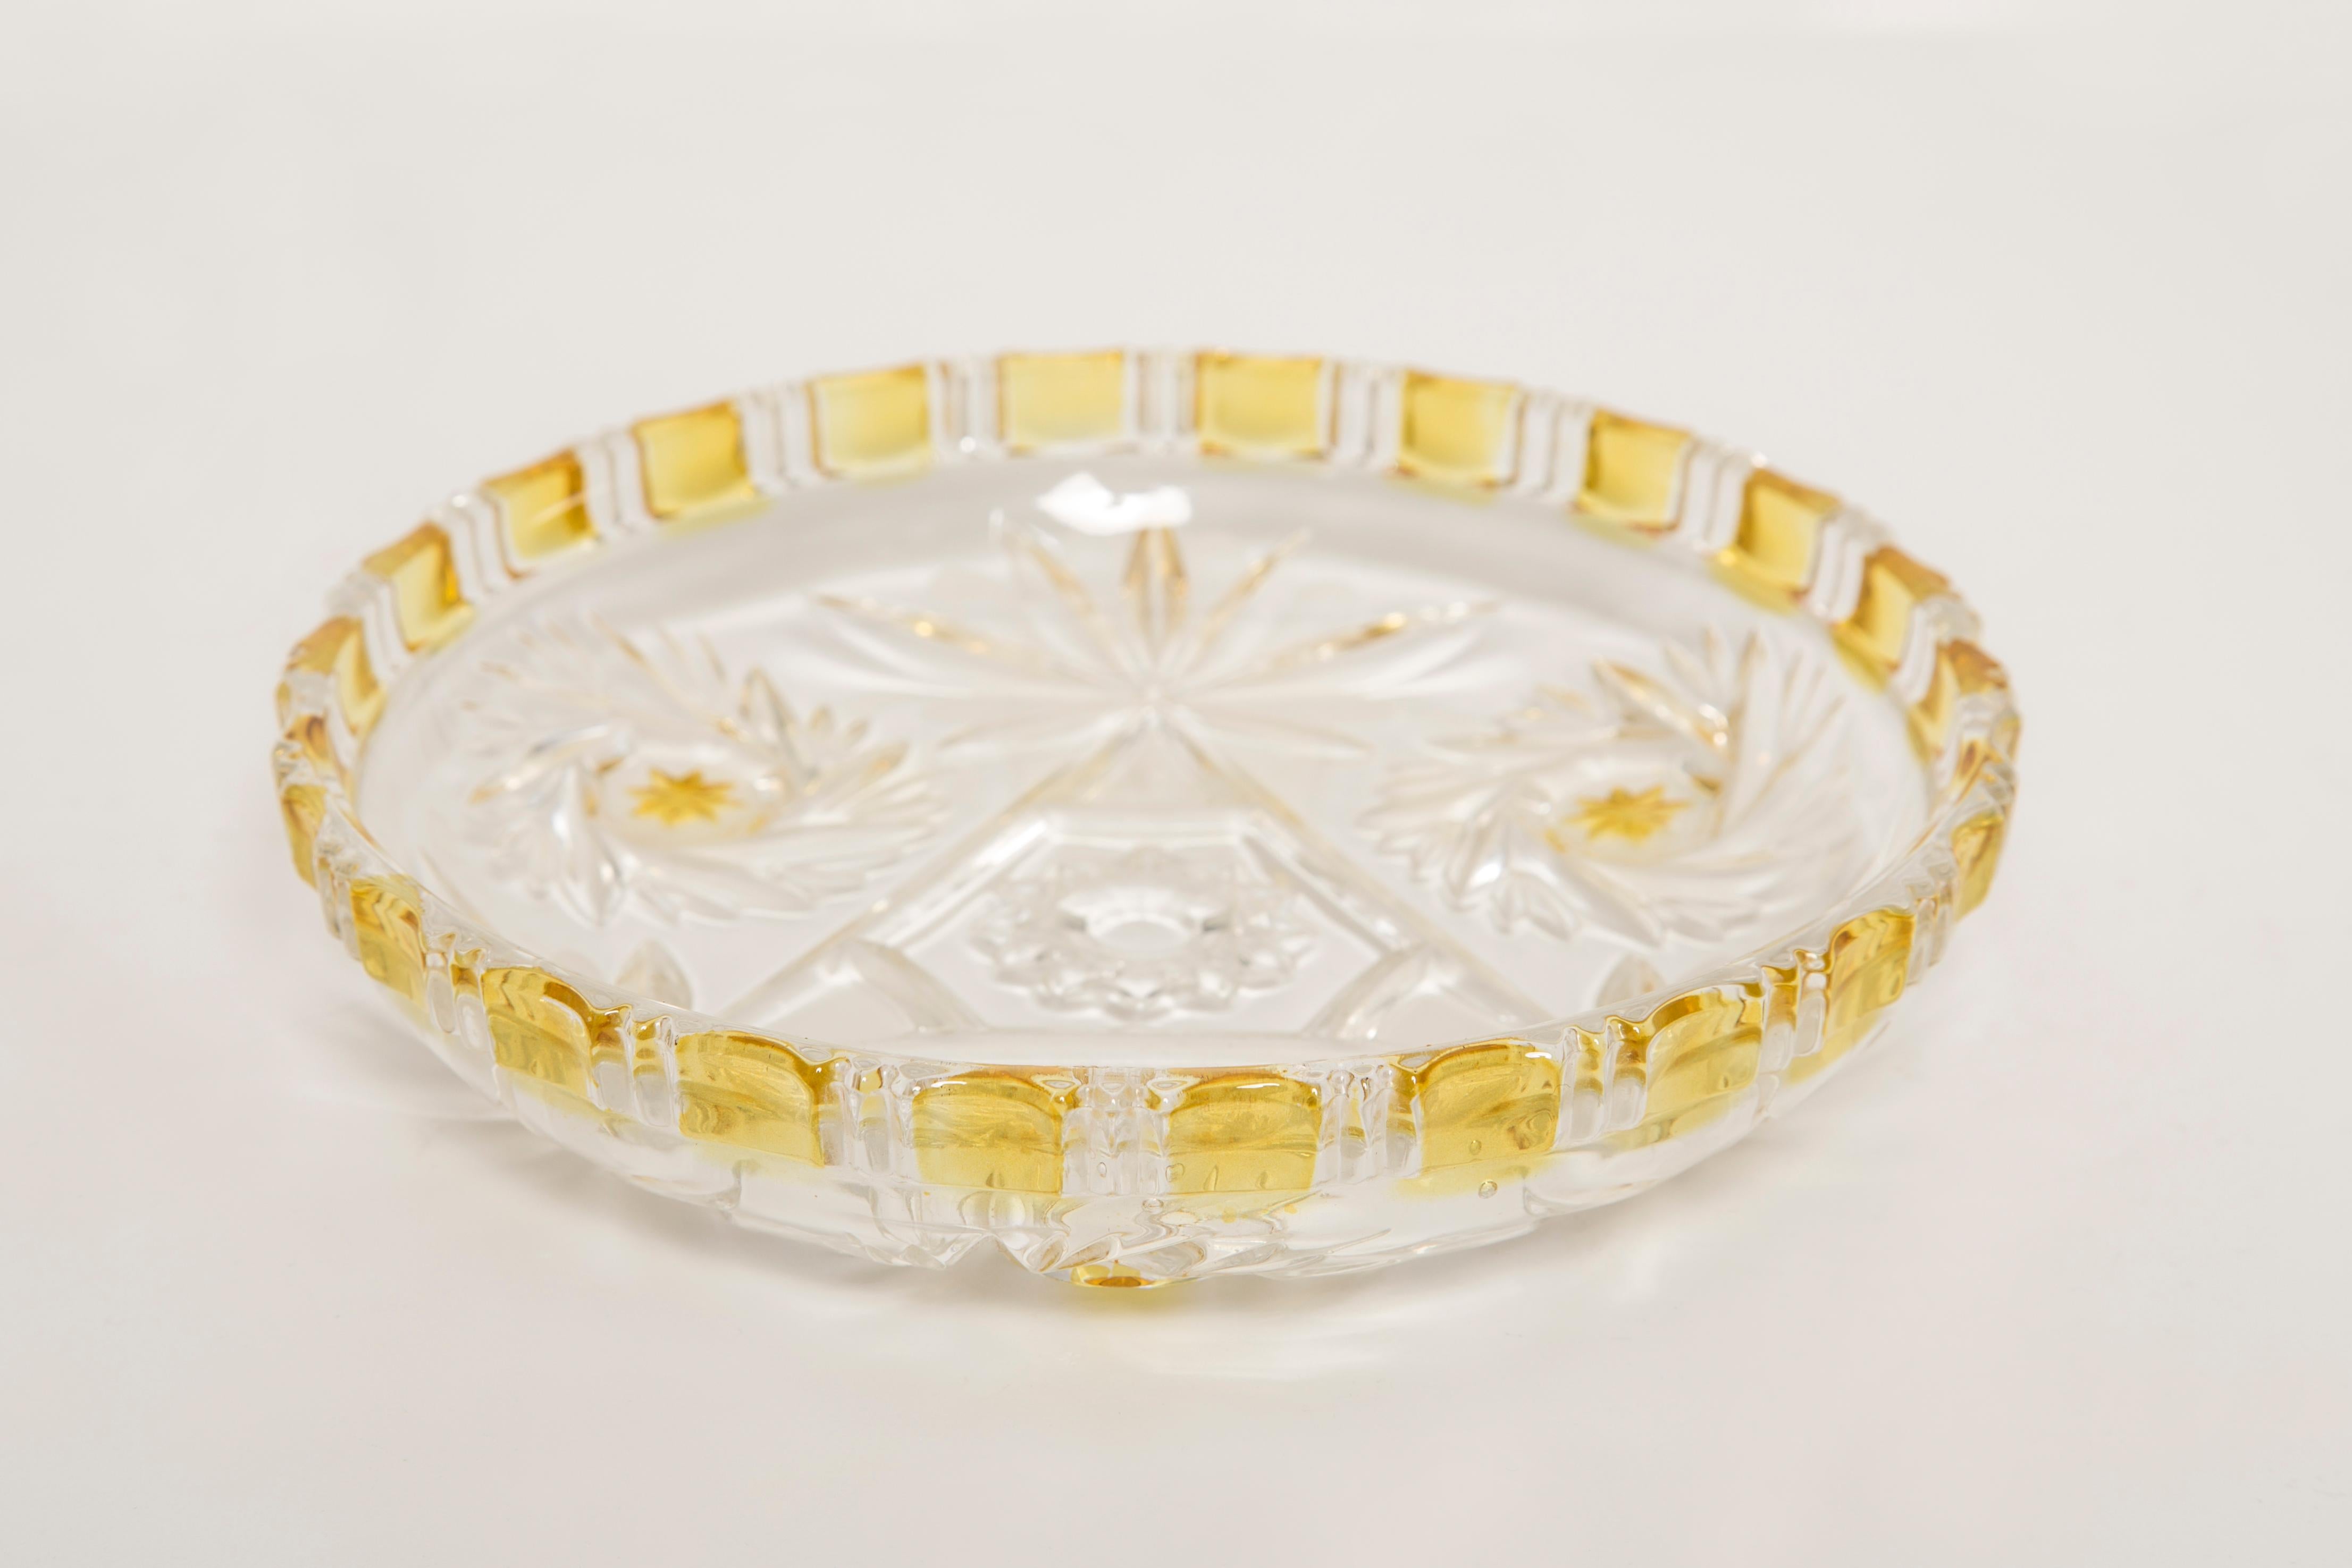 Ceramic Vintage Transparent and Yellow Decorative Glass Plate, Italy, 1960s For Sale